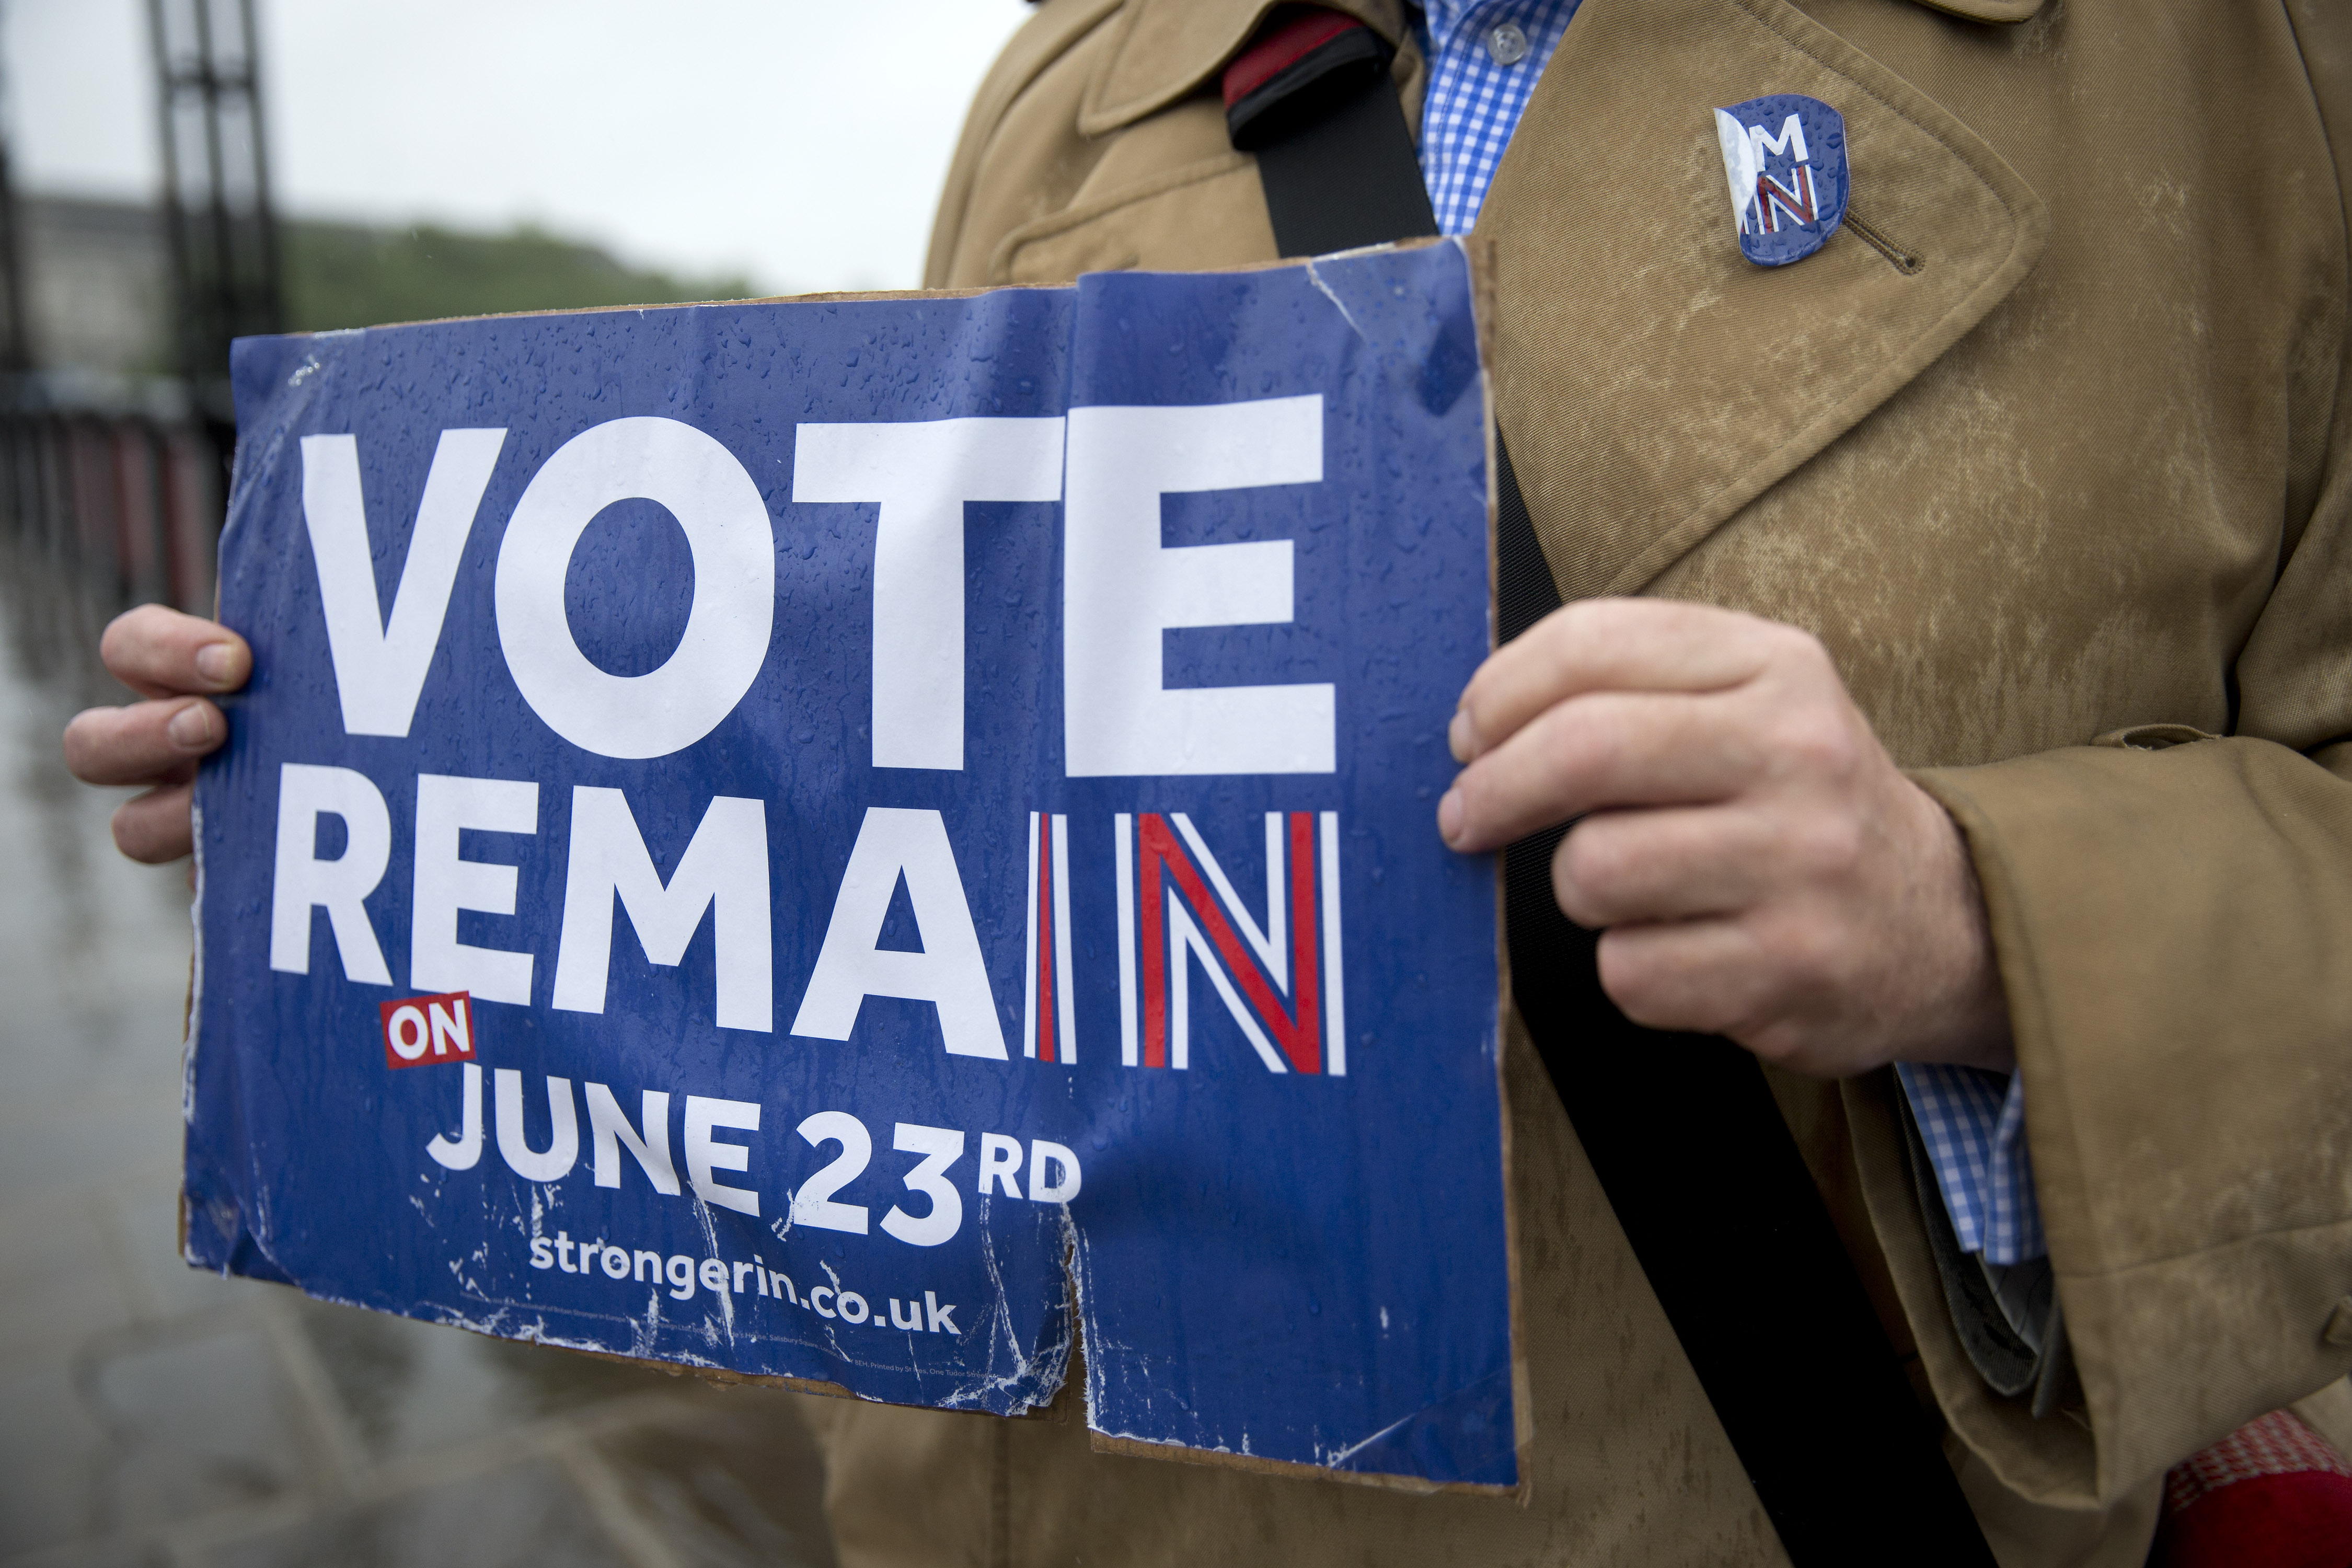 Campaigners hold placards for 'Britain Stronger in Europe', the official 'Remain' campaign group seeking to avoid a Brexit, ahead of the forthcoming EU referendum, in London on June 20, 2016.  JUSTIN TALLIS&mdash;AFP/Getty Images (JUSTIN TALLIS&mdash;AFP/Getty Images)